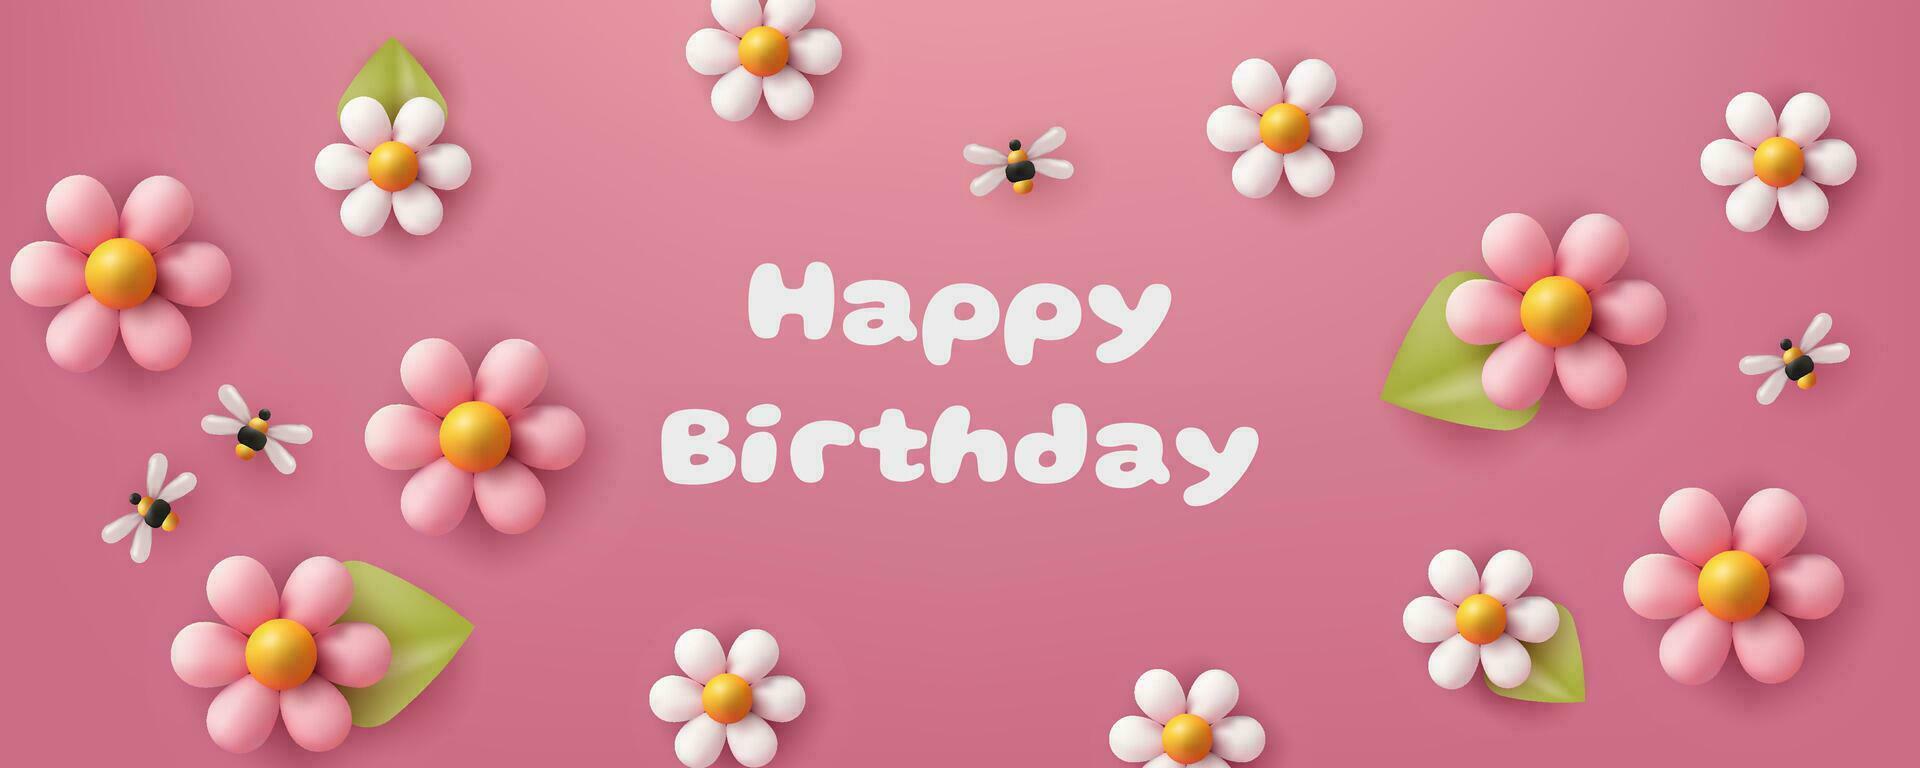 Horizontal banner in pink with a 3D illustration featuring flower balloons, bees and a cheerful birthday design. Realistic and cute invitation card. Not AI generated. vector